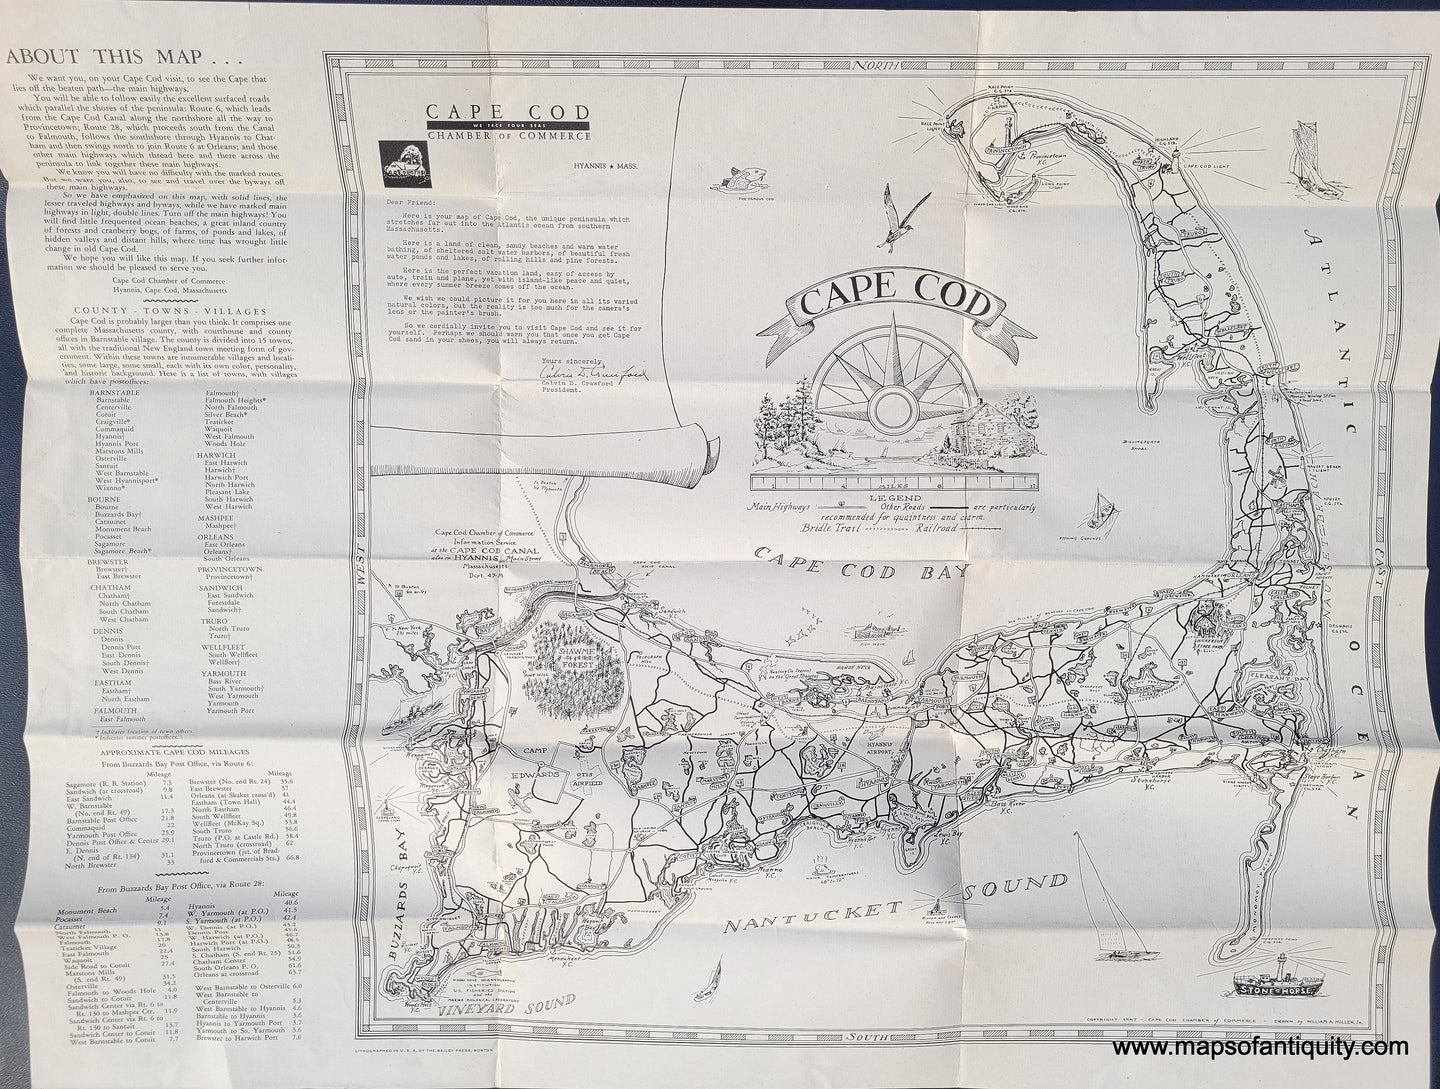 Vintage-Antique-Folding-Map-Cape-Cod--US-Massachusetts-Cape-Cod-and-Islands-1947-Cape-Cod-Chamber-of-Commerce--1940s-tourist-tourism-travel-fun-driving-roadtrip-map-Maps-Of-Antiquity